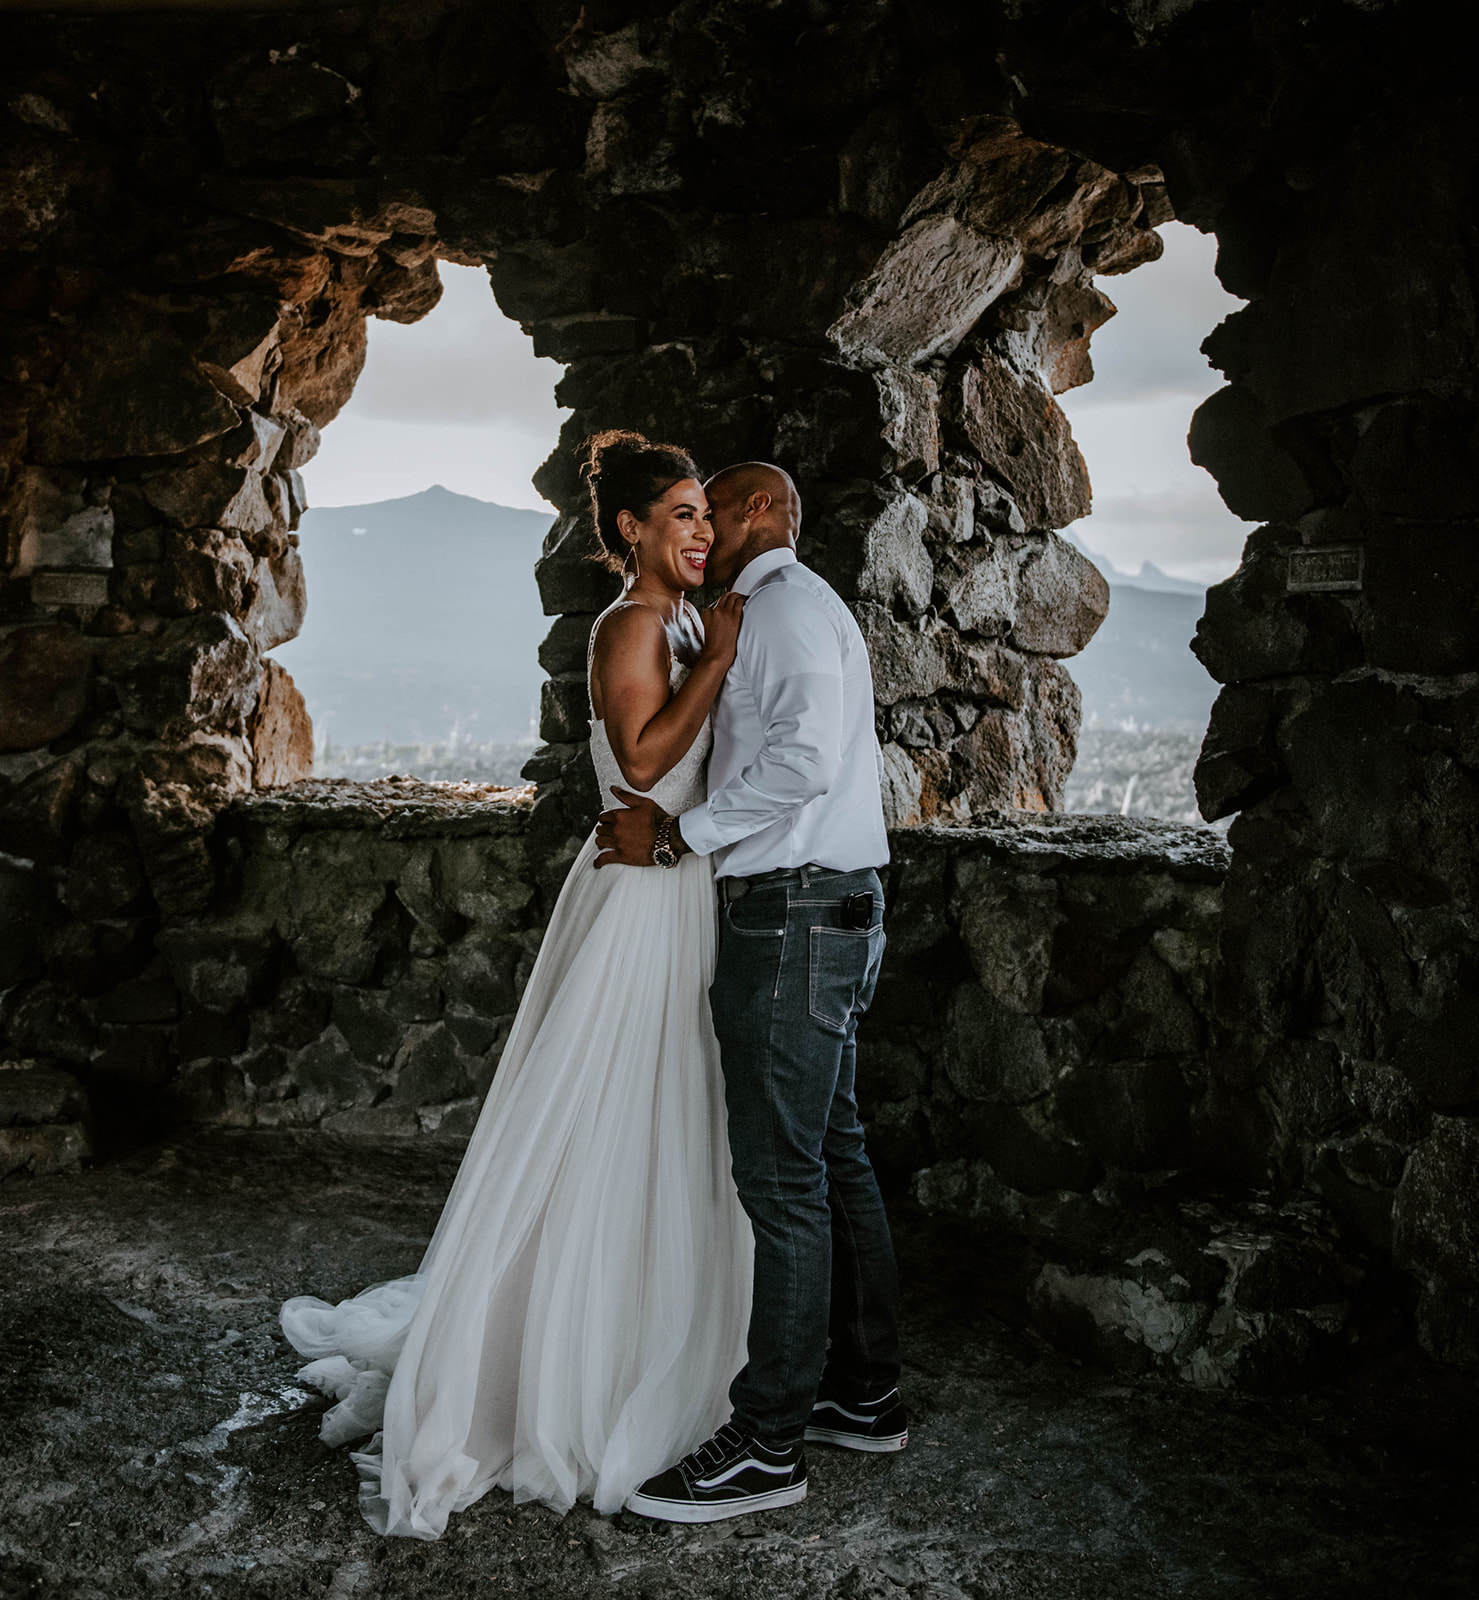 A bride and groom inside of the Oregon lava rock castle - Dee Wright Observatory